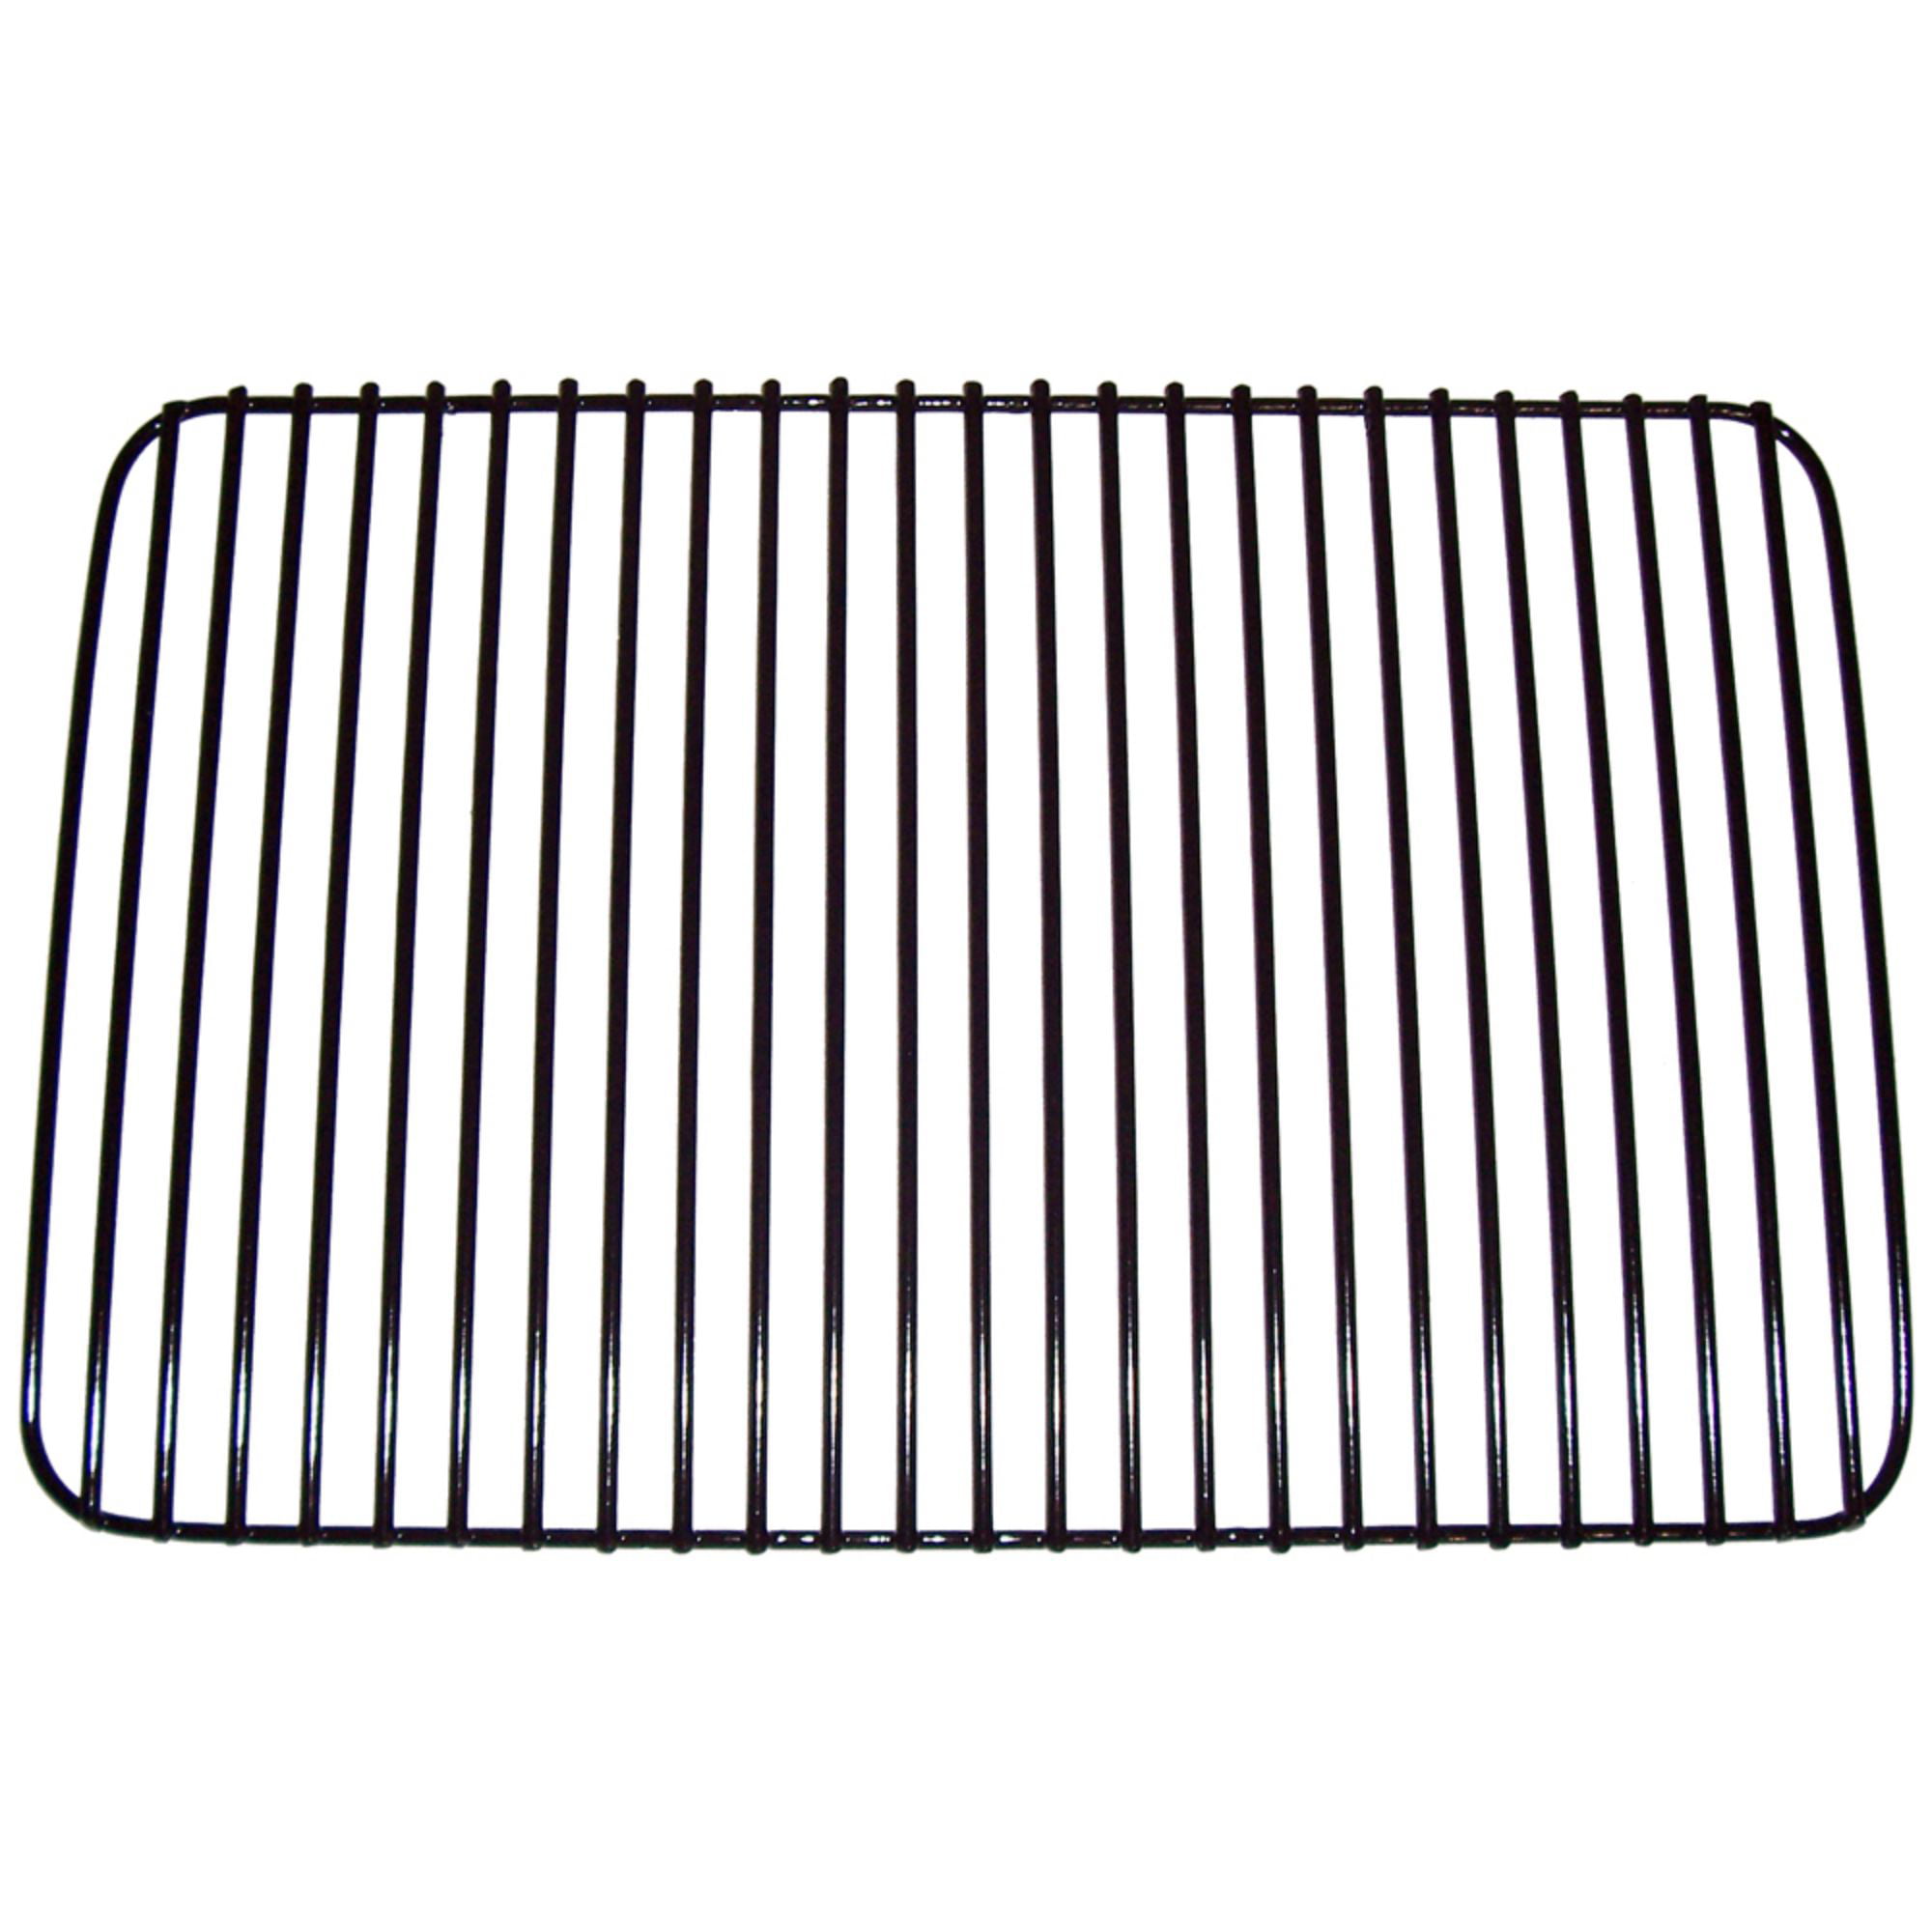 Fiesta Gas Grill Porcelain Coated Cooking Grates 21 3/8" X 13 13/32" 54601 new 